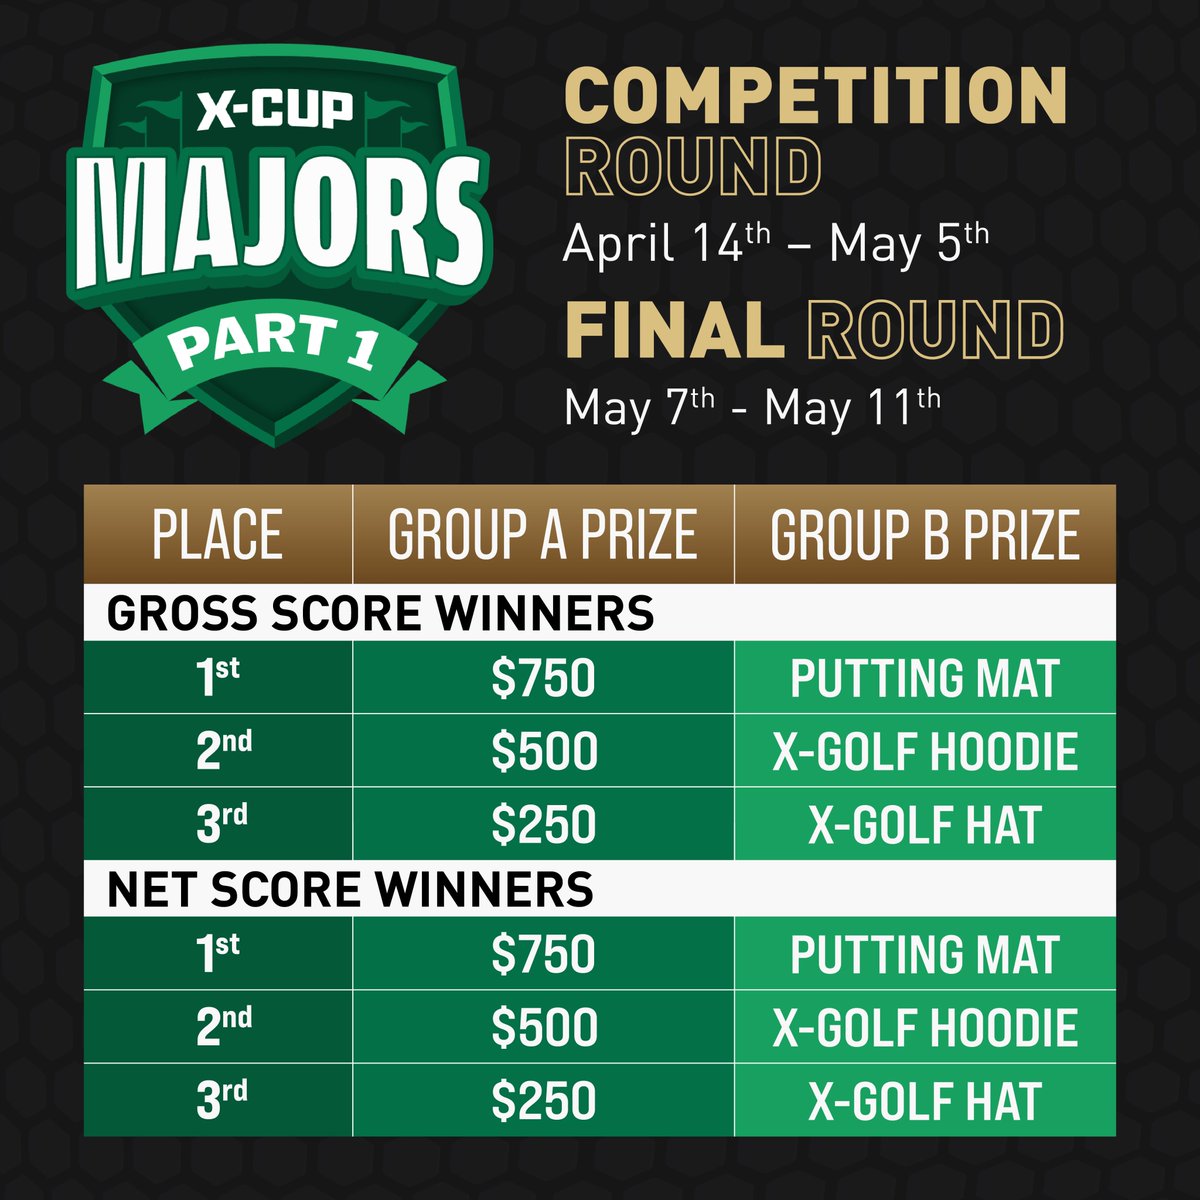 Only a few days left in the X-Cup Majors Part 1!! We have some pretty cool prizes if you ask me 👀 #XGolf #XCup #IndoorGolf